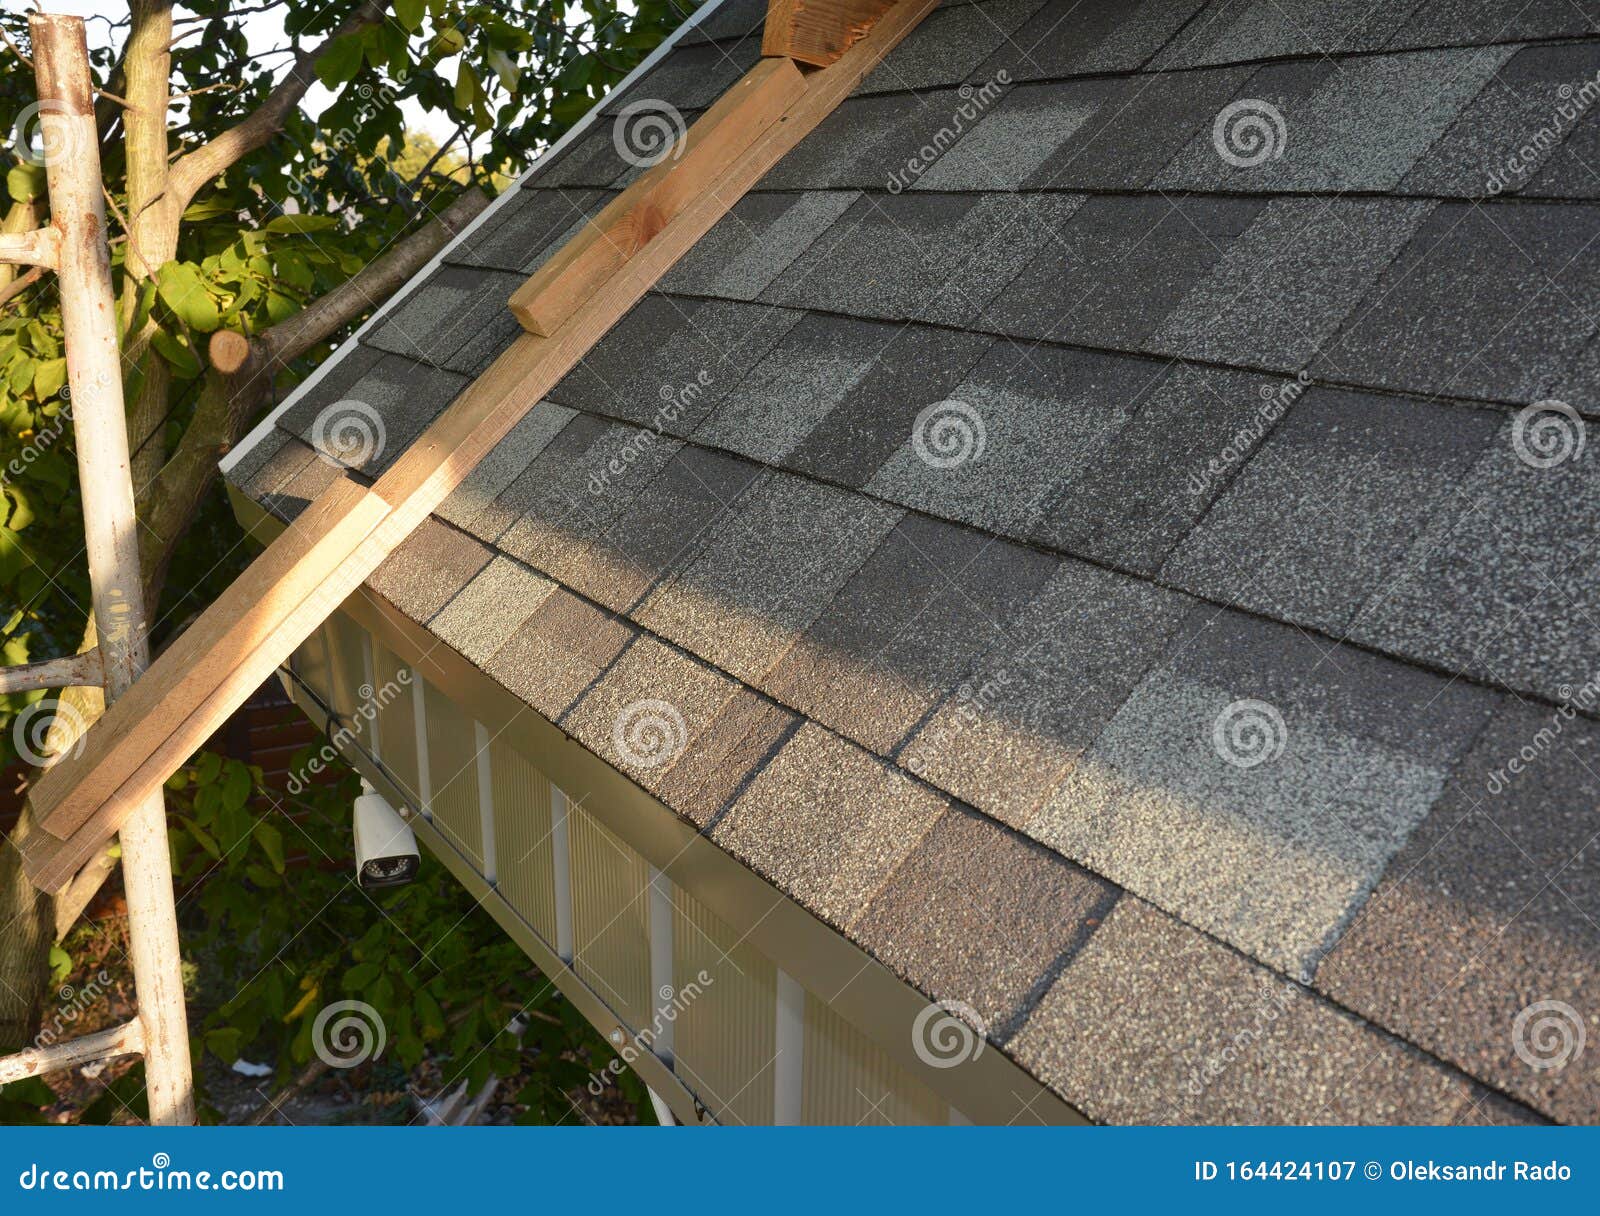 roofing construction.  installing, repair, renovate  asphalt shingles roof tiles on the rooftop outdoors